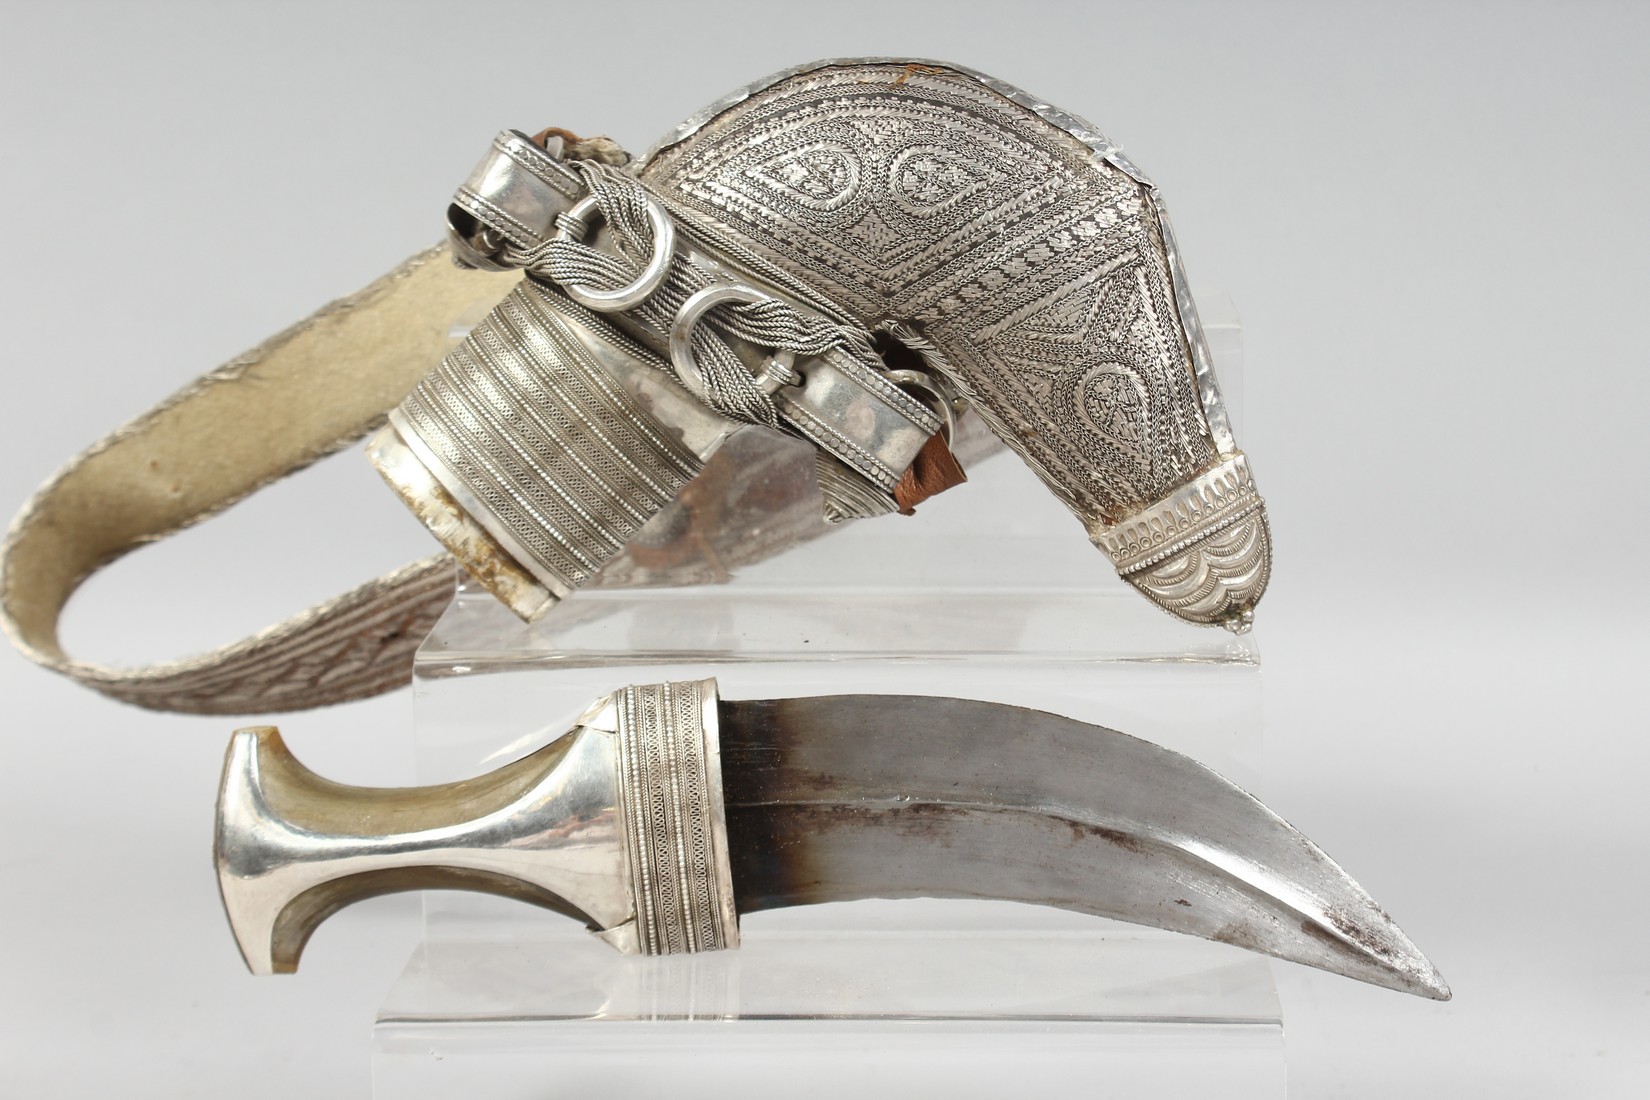 TWO FINE 19TH / EARLY 20TH CENTURY ARAB OMANI JAMBIYA DAGGERS, with bovine horn handles and original - Image 4 of 5